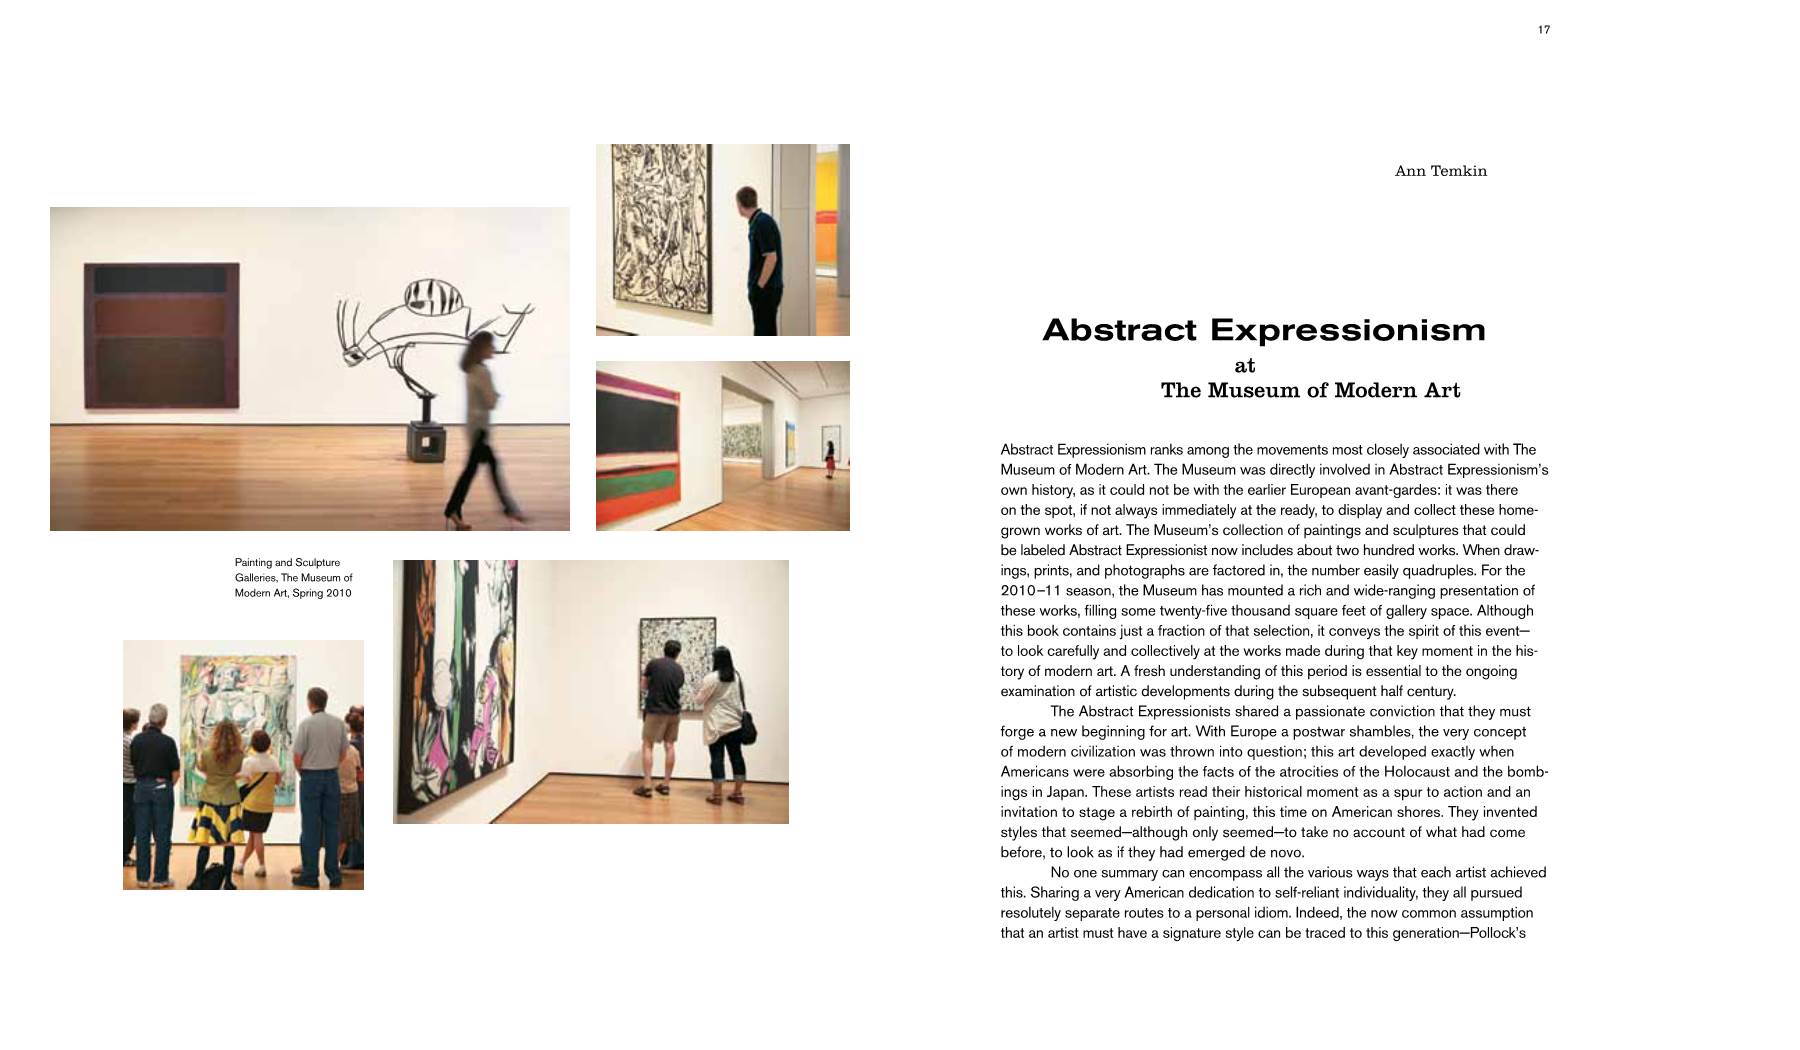 Abstract Expressionism at the Museum of Modern Art